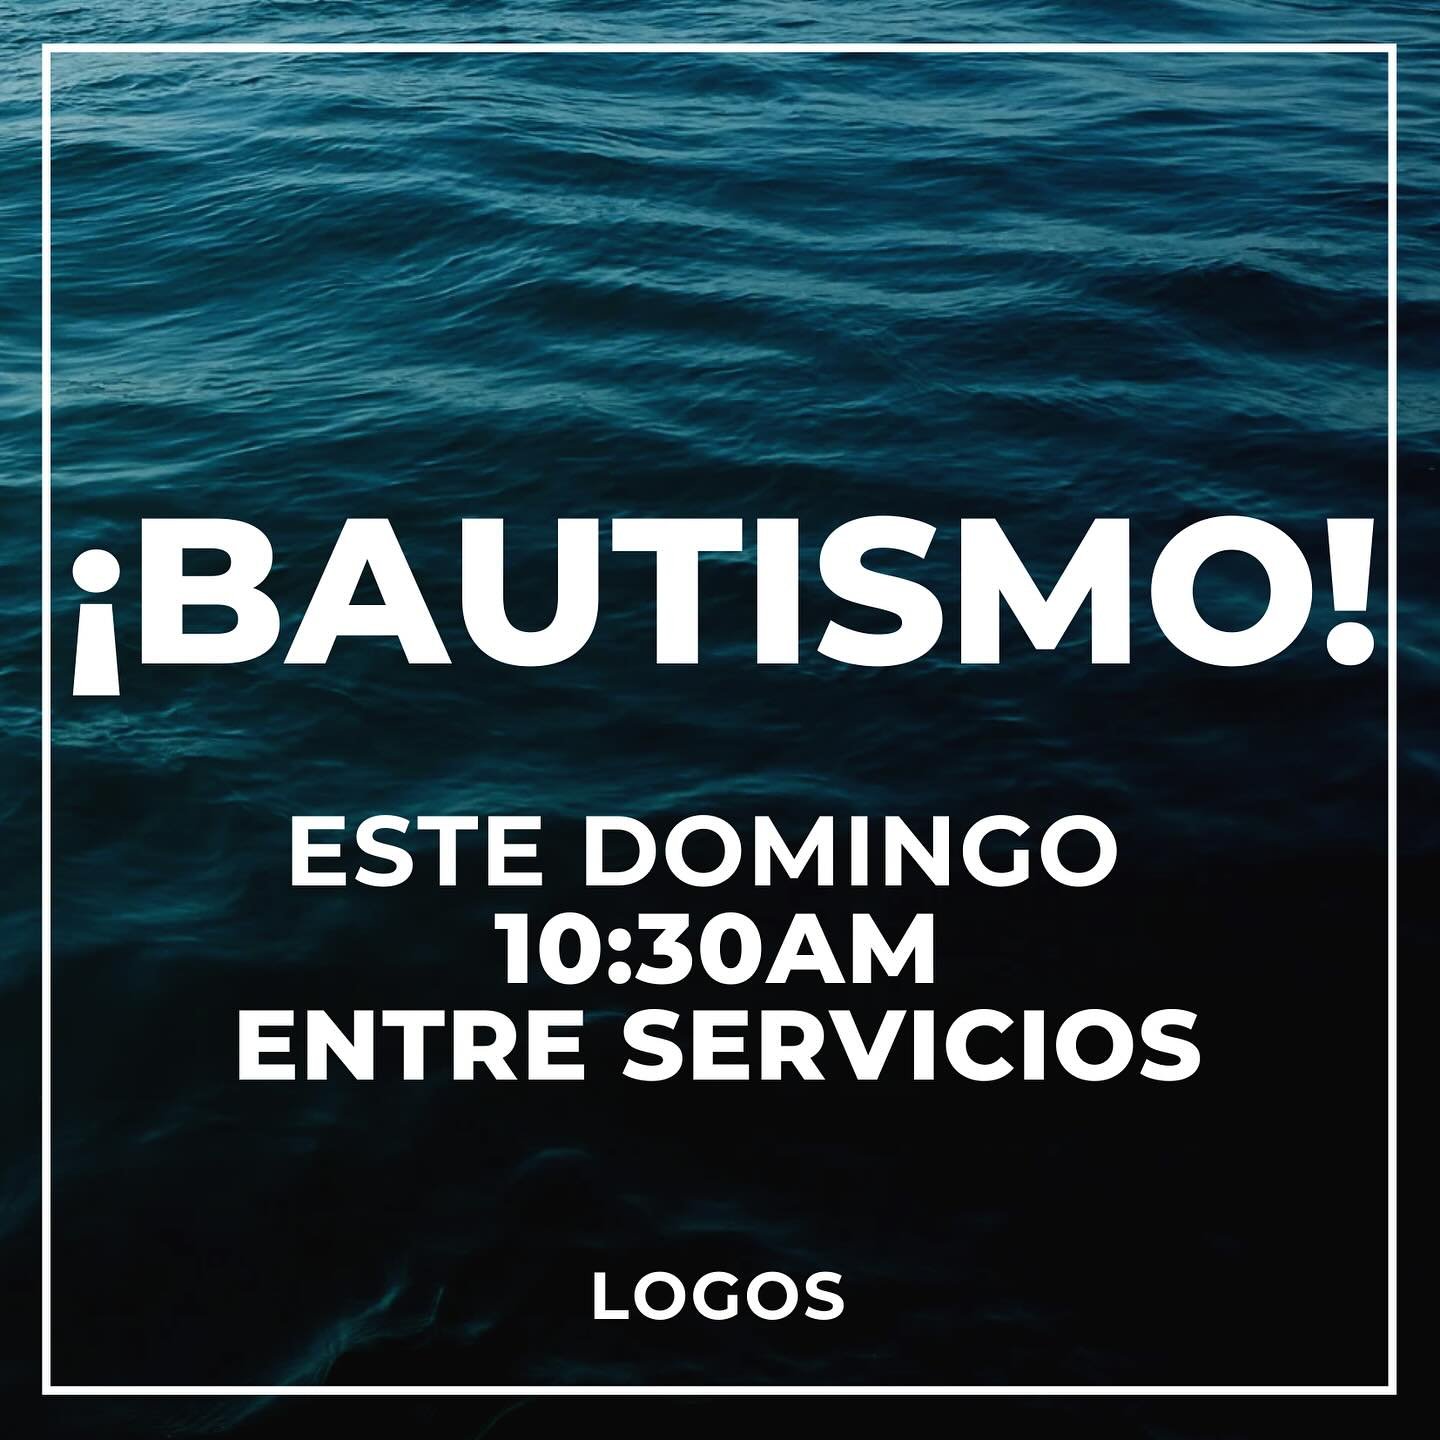 Join us this Sunday! In between services we will baptize one of our brothers who has put his faith in Jesus Christ as LORD. We start at 10:30am sharp!

- 

&ldquo;&iexcl;&Uacute;nete a nosotros este domingo! Entre los servicios bautizaremos a uno de 